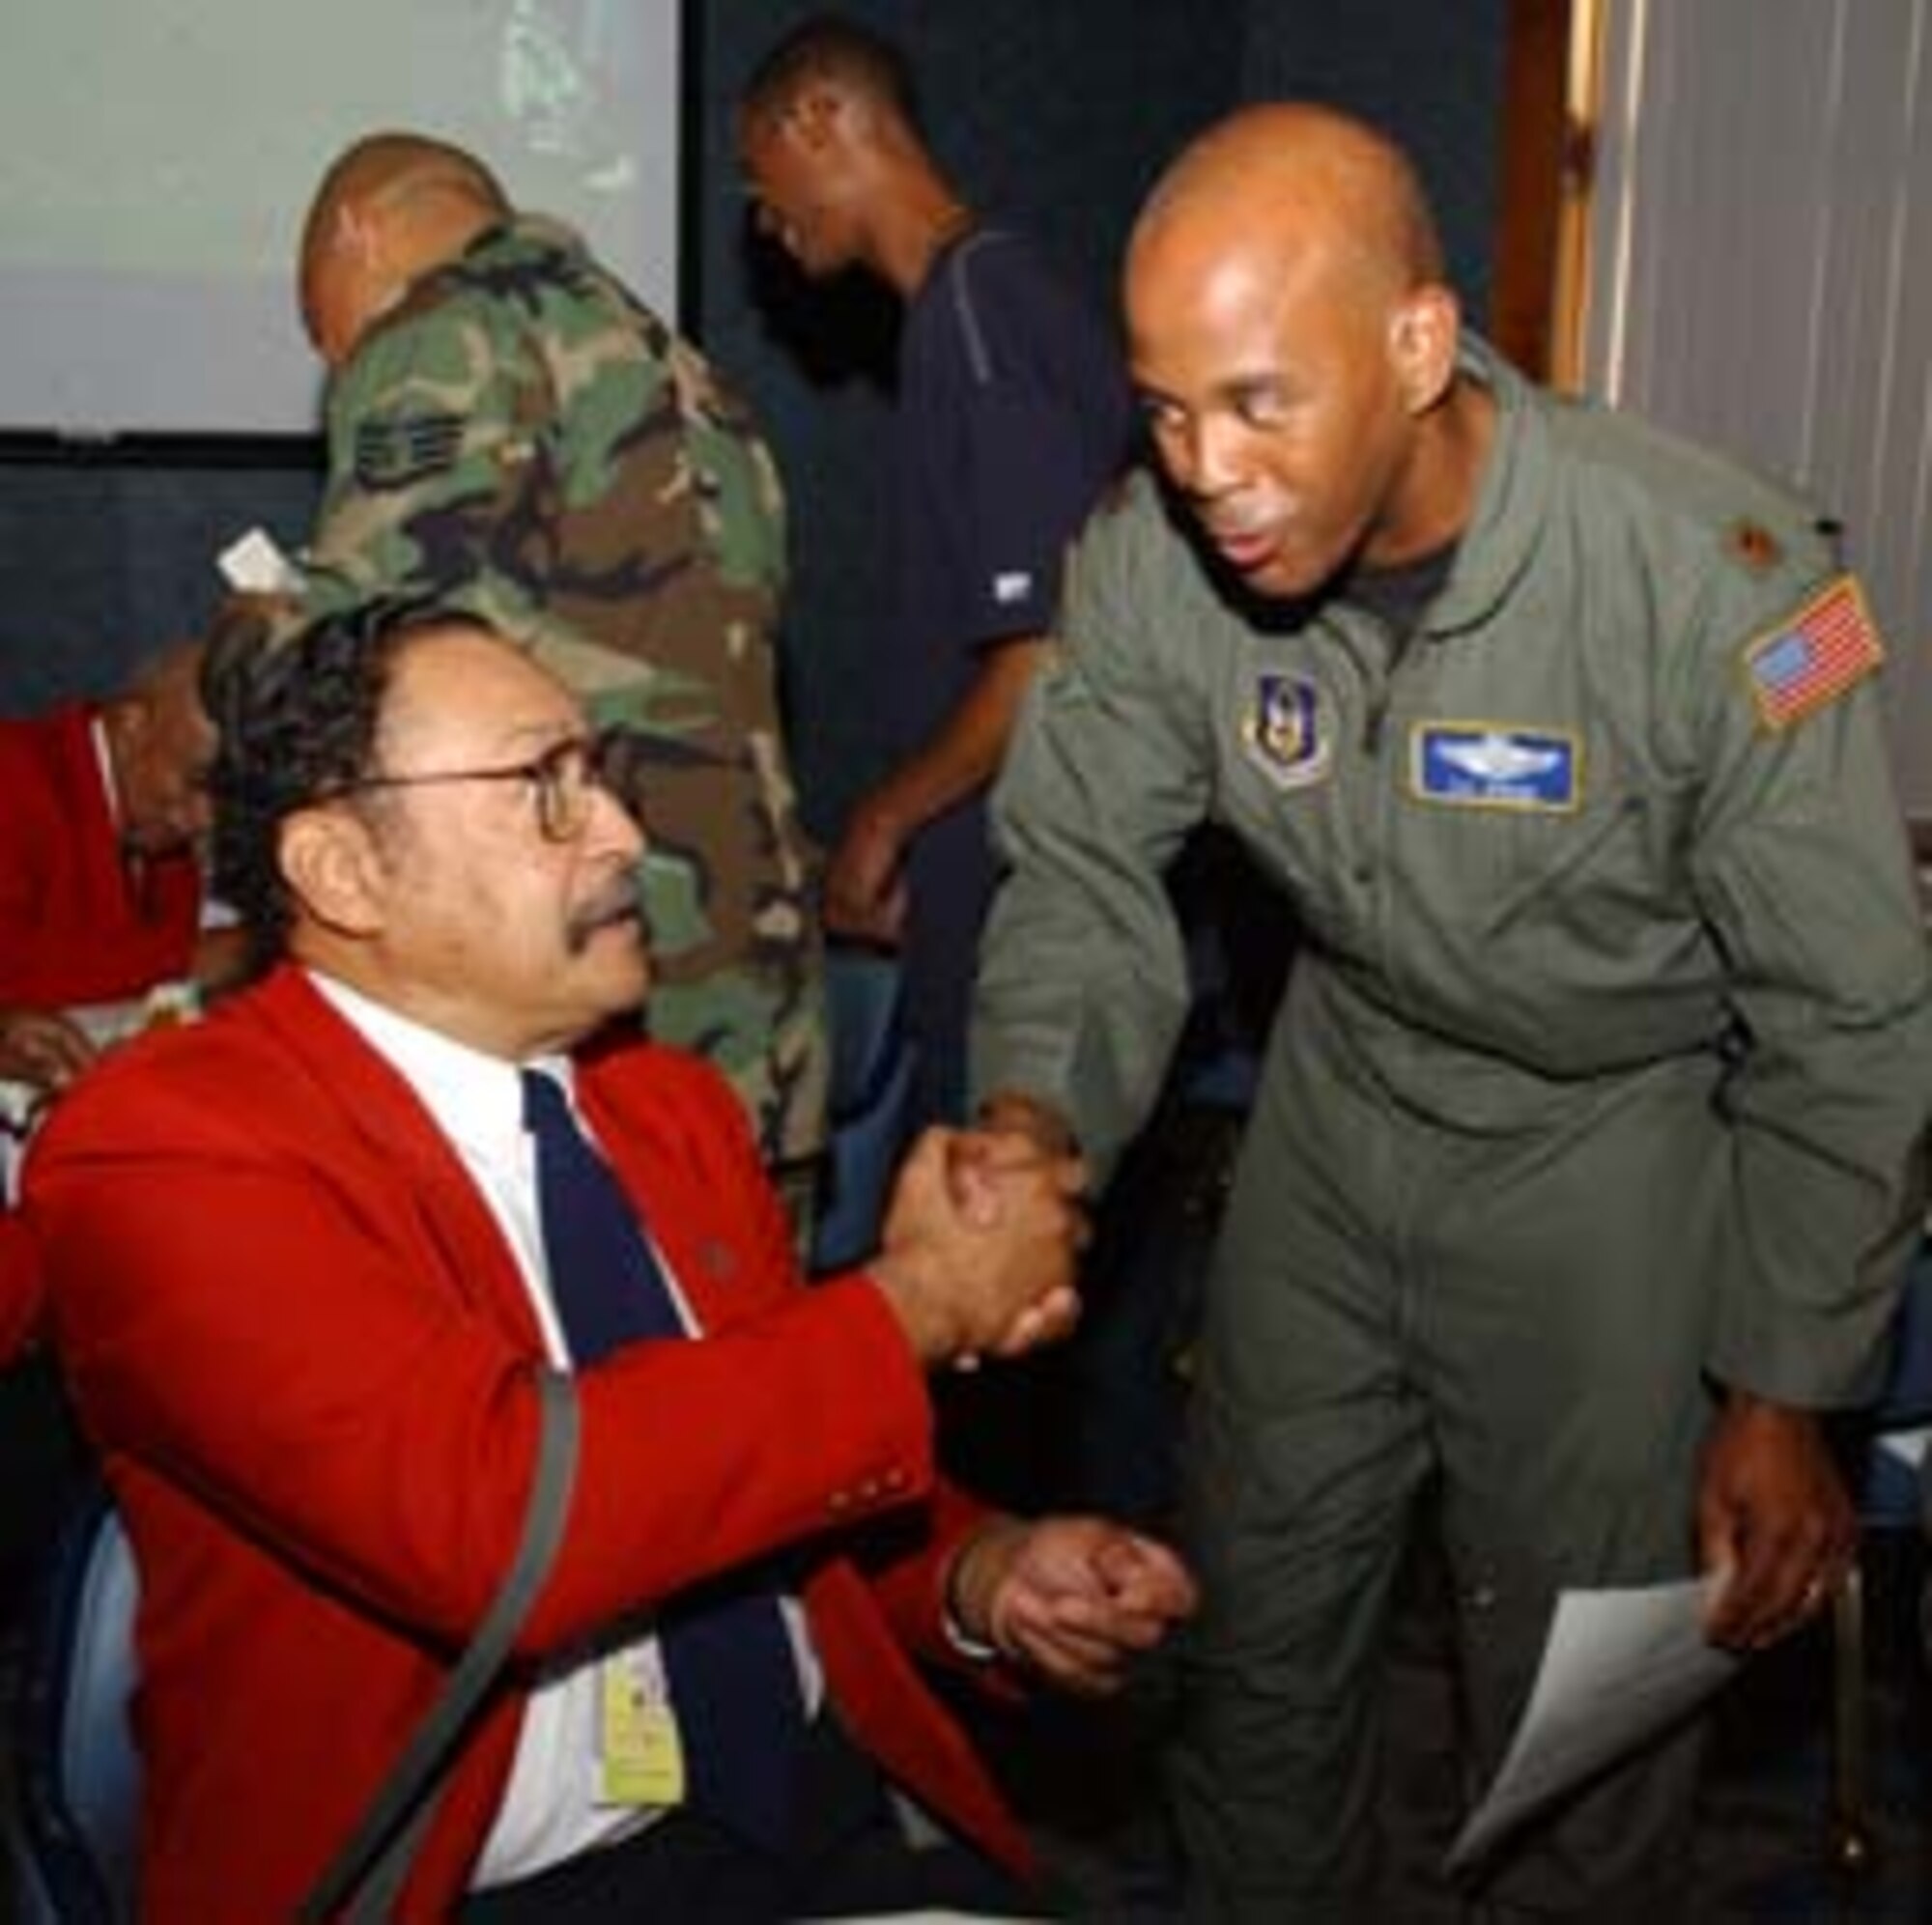 ANDREWS AFB, Md. -- Maj. Eric Jenkins, a pilot with the 459th Air Refueling Wing, shakes hands with Tuskegee Airman, retired colonel, William Broadwater.  Colonel Broadwater and the other famed and historic members of the African-American fighter squadron that escorted U.S. bomber aircraft into enemy territory in World War II, stopped by the Air Force Reserve unit to present an award to wing commander, Col. Stayce D. Harris and the wing during its commander's call.  The award is a thanks to Colonel Harris for her long-ime involvement in Tuskegee Airmen International.  
     Upon the announcement of their presence, the wing members gave a long, rousing, standing ovation.  The Tuskegee Airmen finished off their day at the Club at Andrews.  There, they signed photos of their famous "Redtail" fighter aircraft refueling a B-24, a piece of art created by artist Mickey Harris.